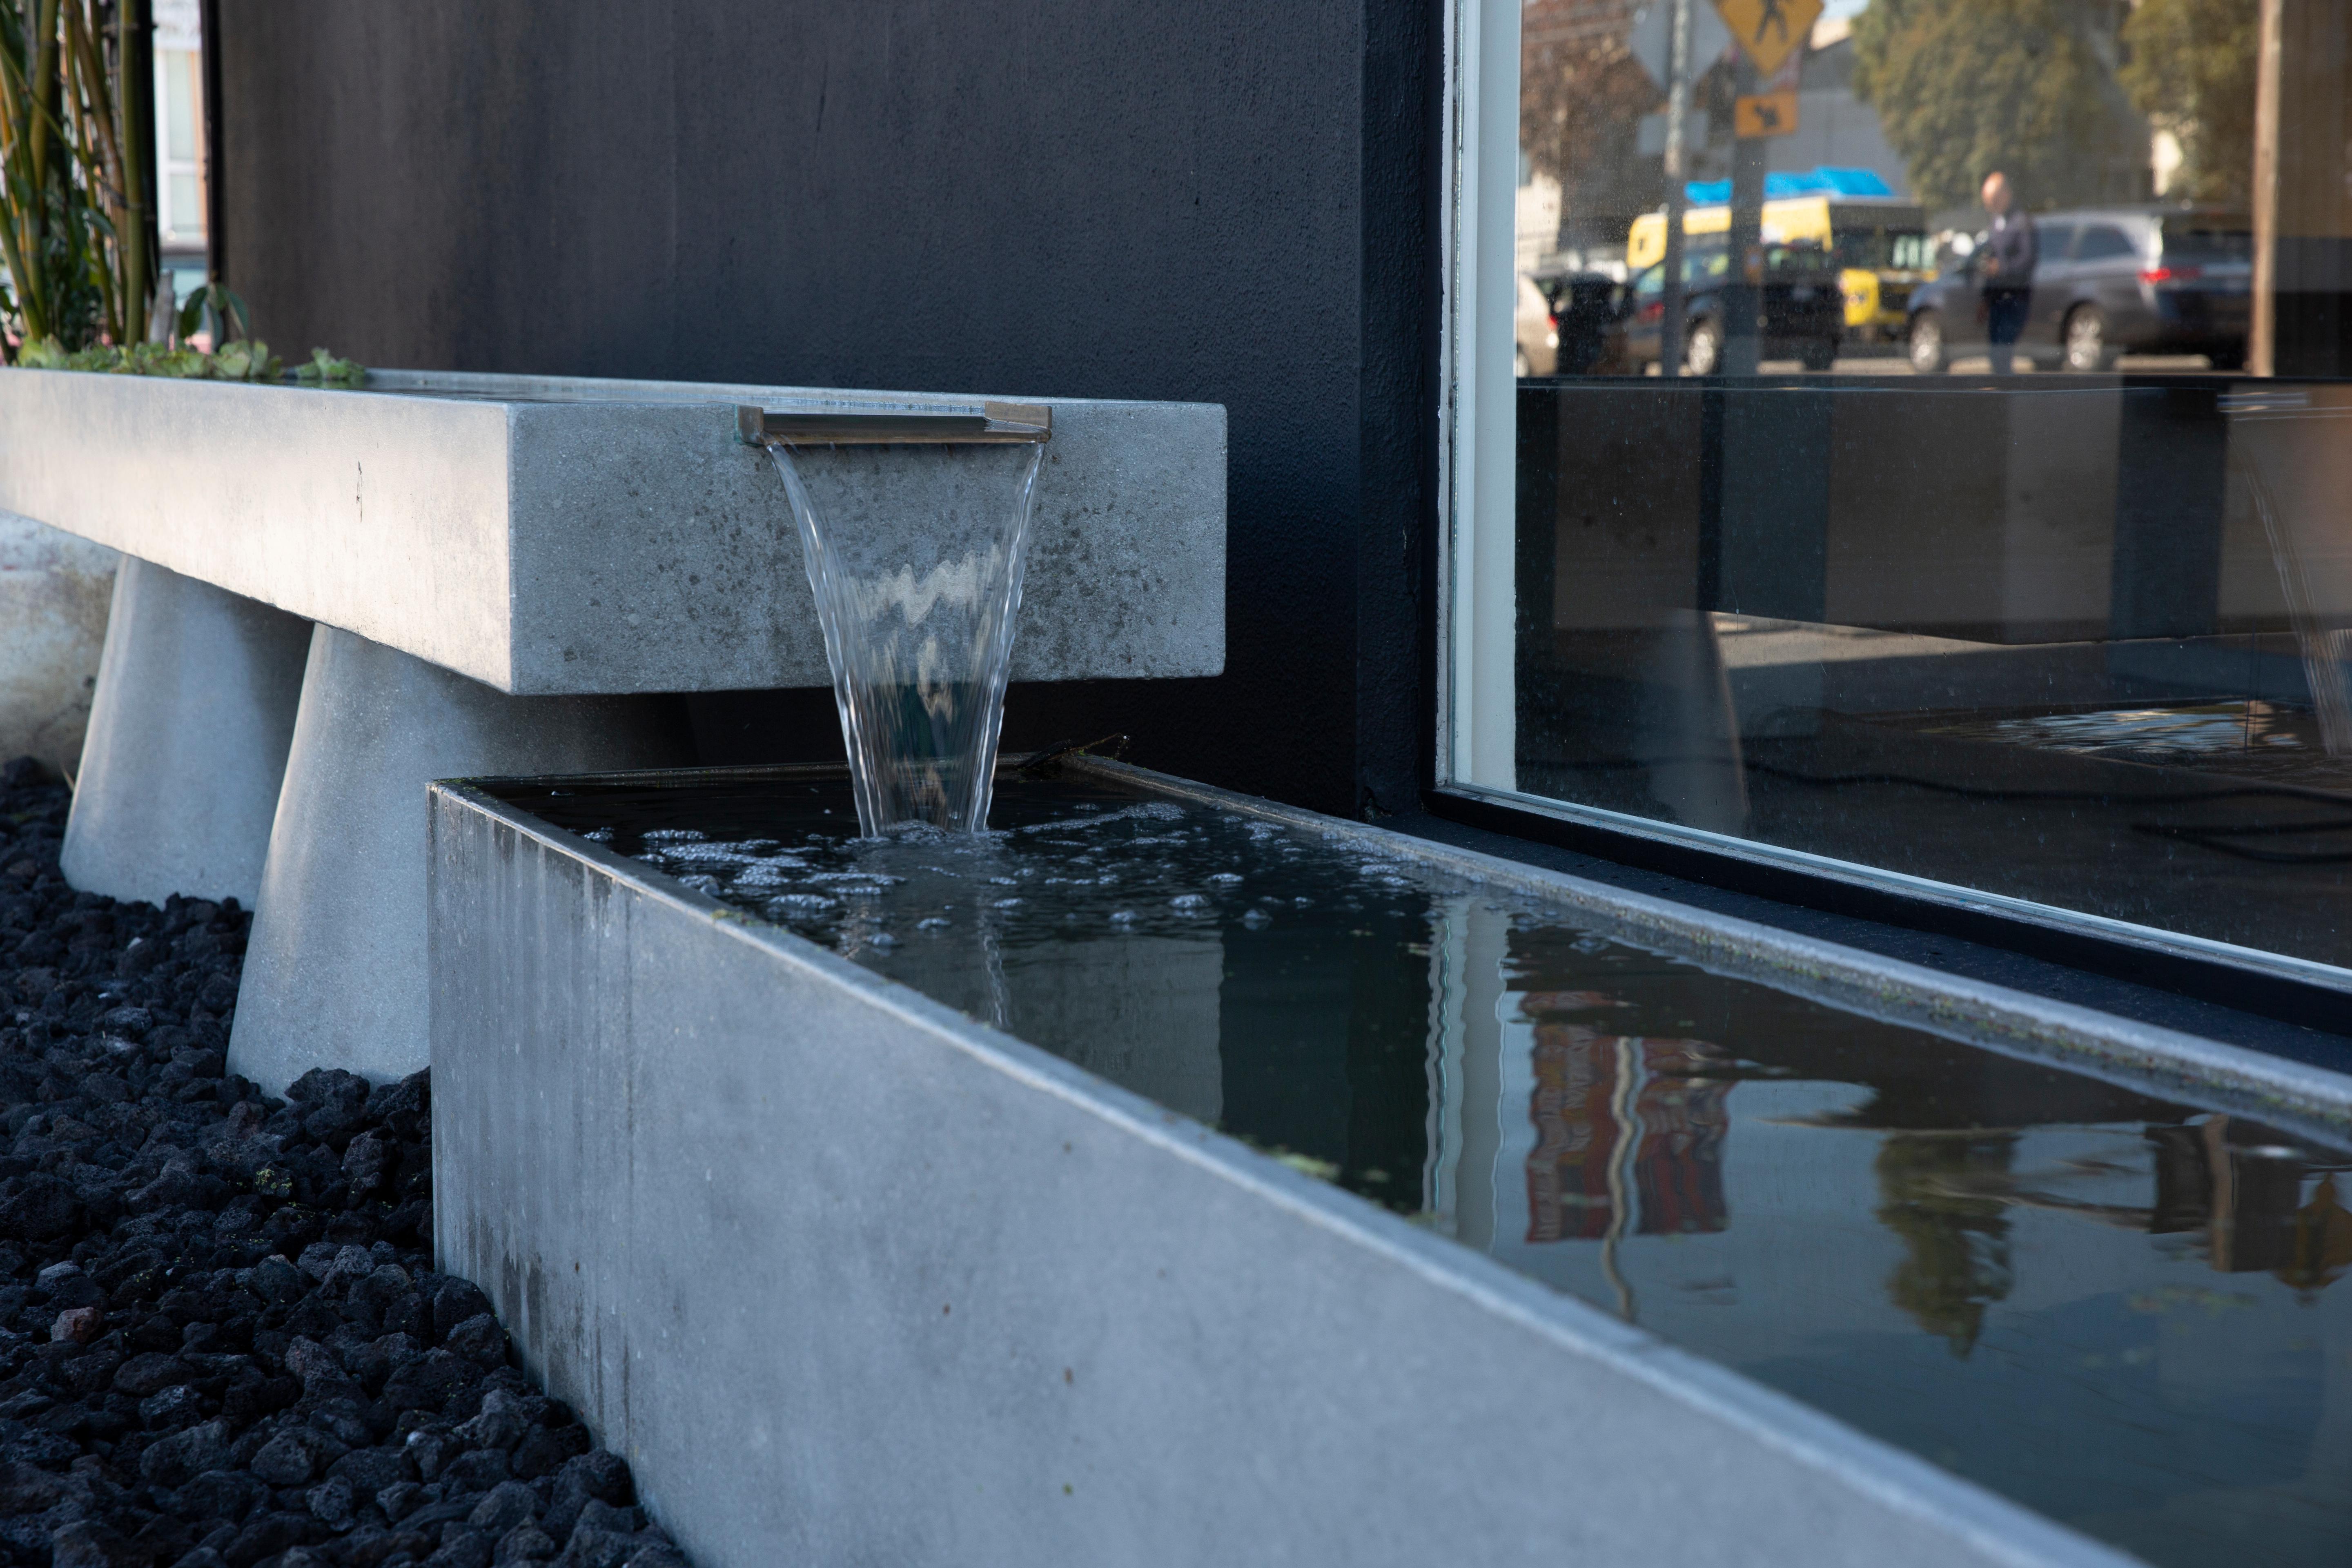 James de Wulf's two-tier concrete fountain boasts simplistic beauty with a smooth polished concrete surface, accented with a bronze waterfall. The beauty of bronze, ductile and resistant to corrosion, married with the strength and density of